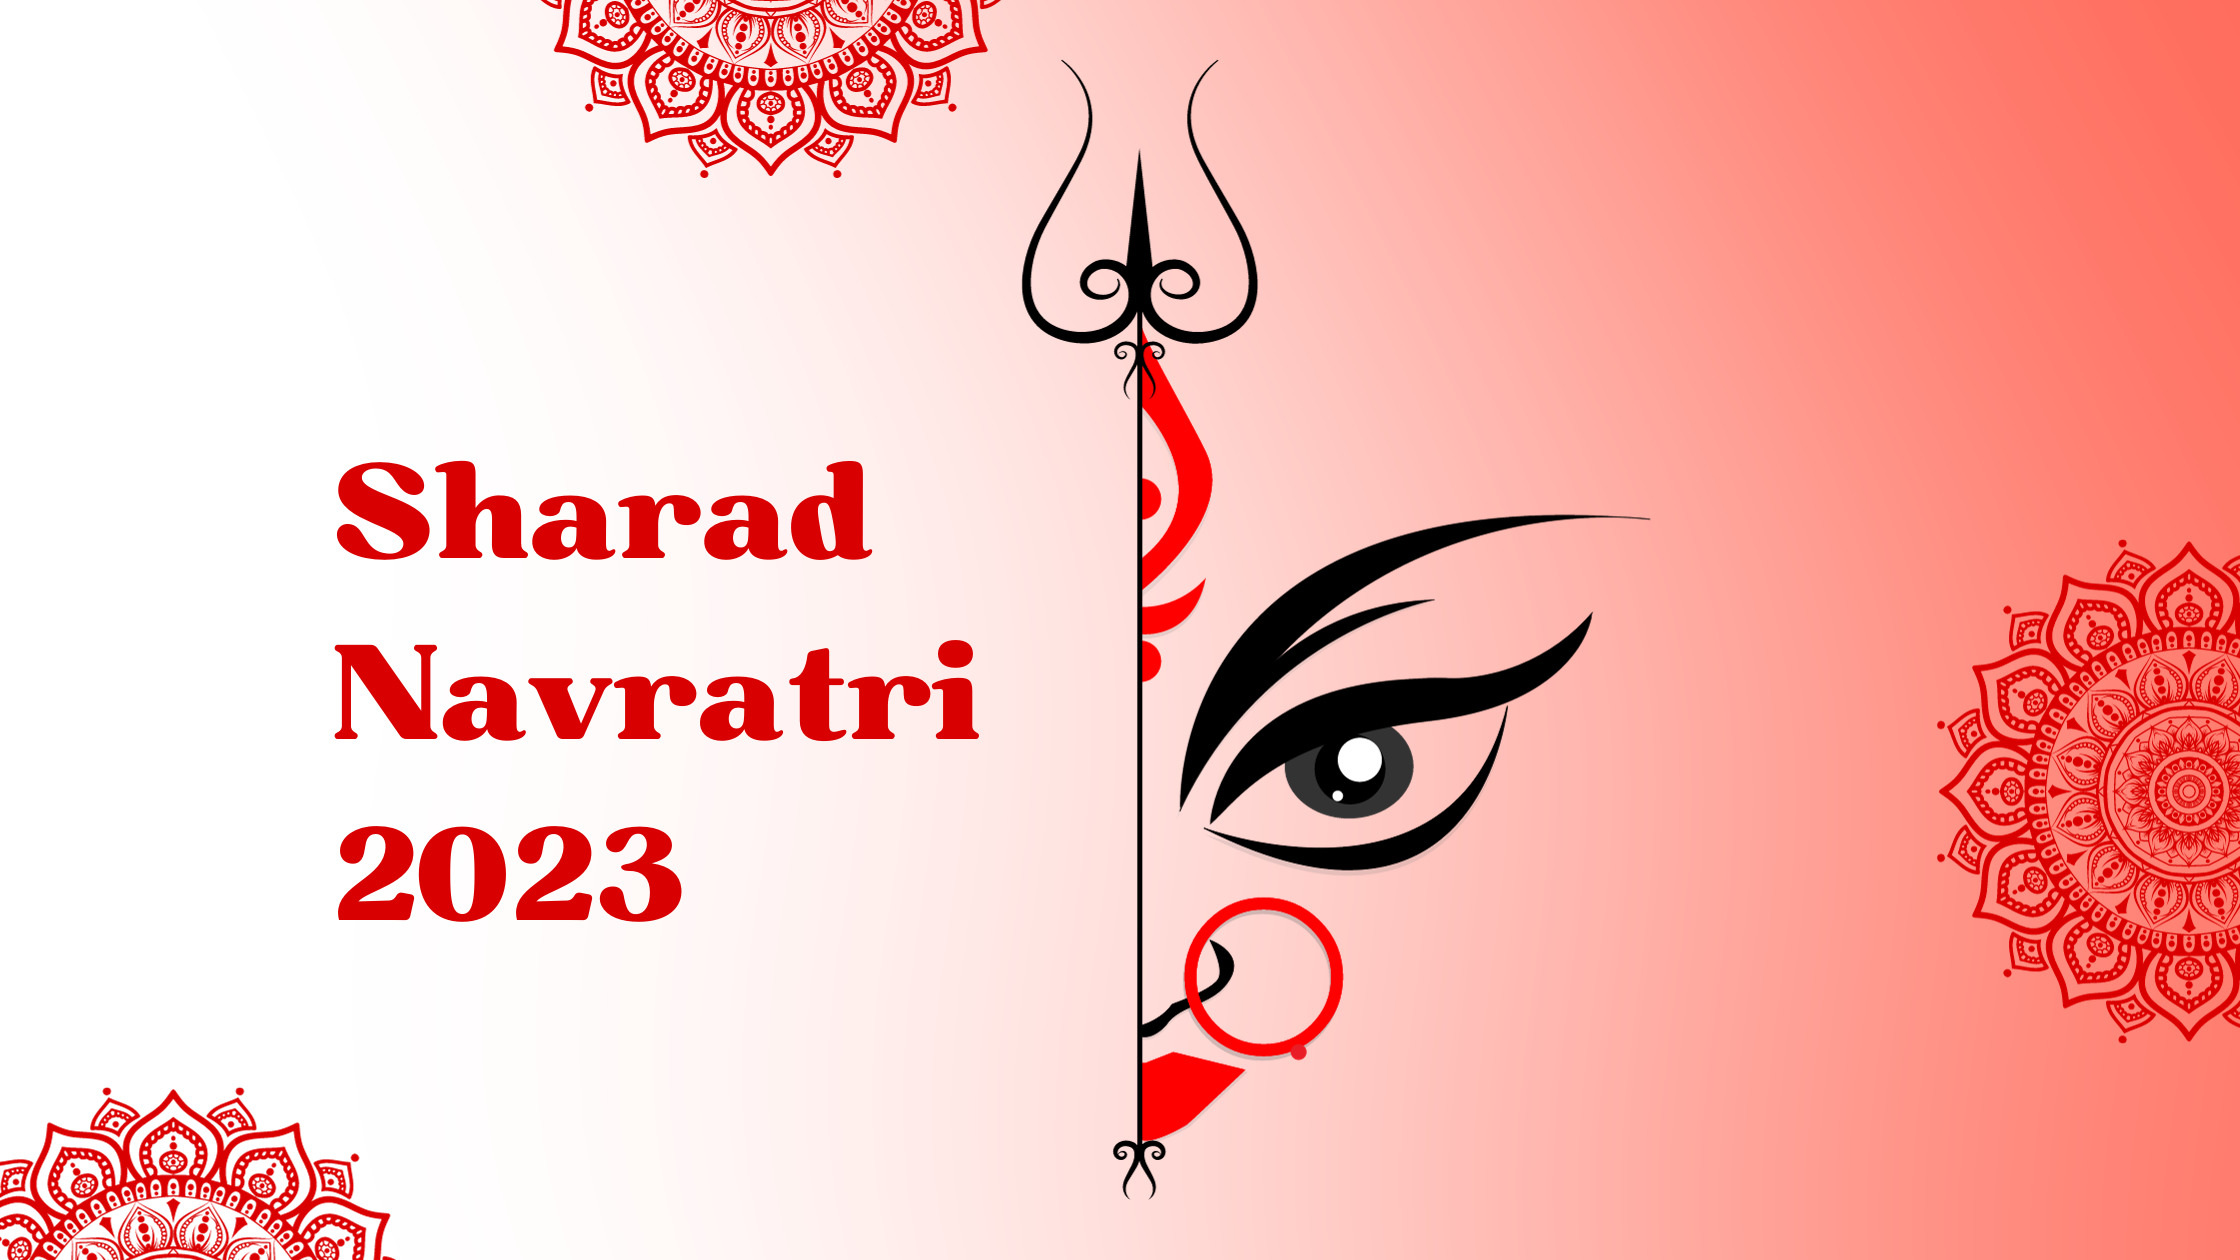 Sharad Navratri 2023 Embrace the Rich Traditions and know the Essence of Each Day